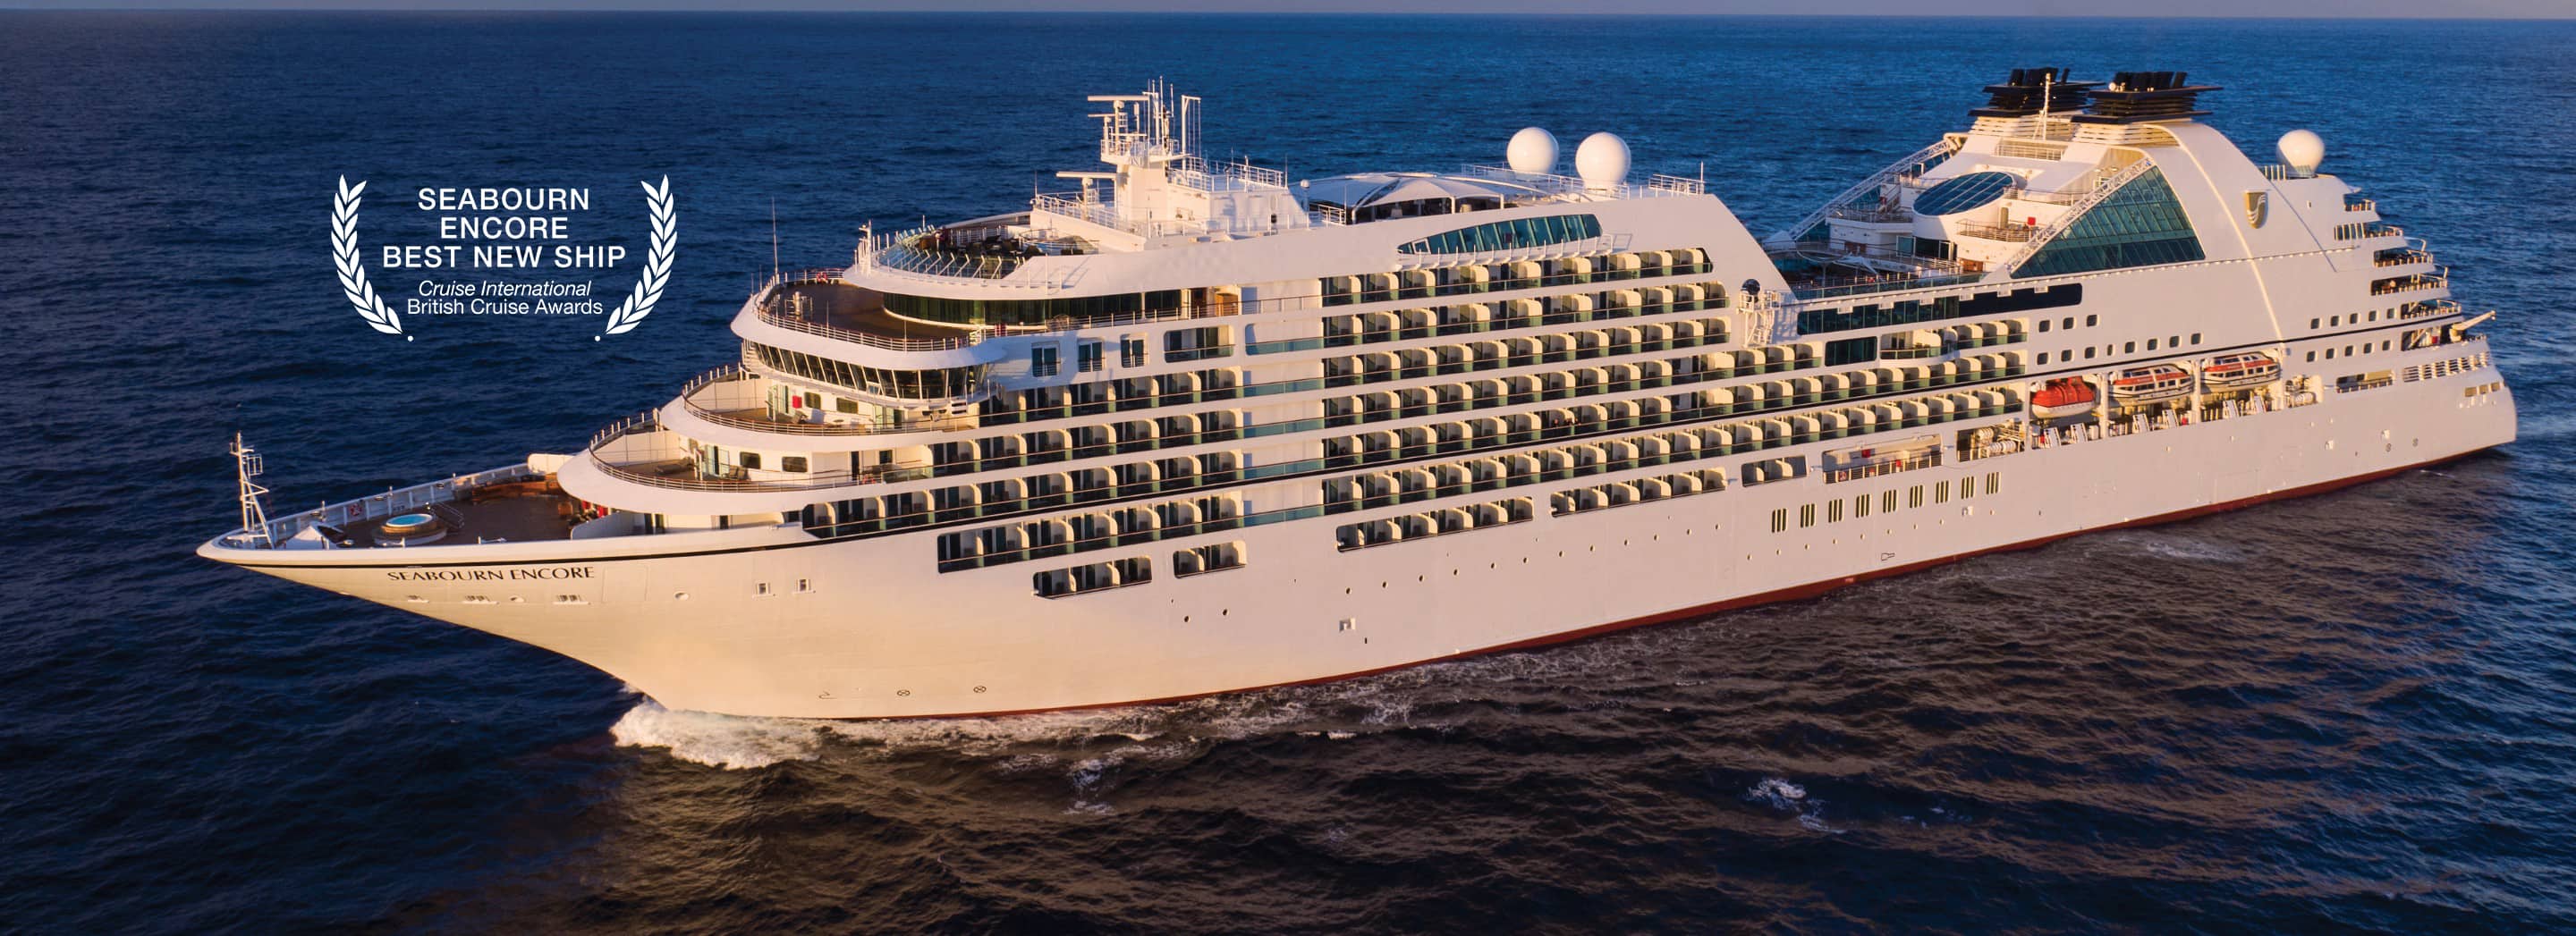 seabourn cruise line ratings